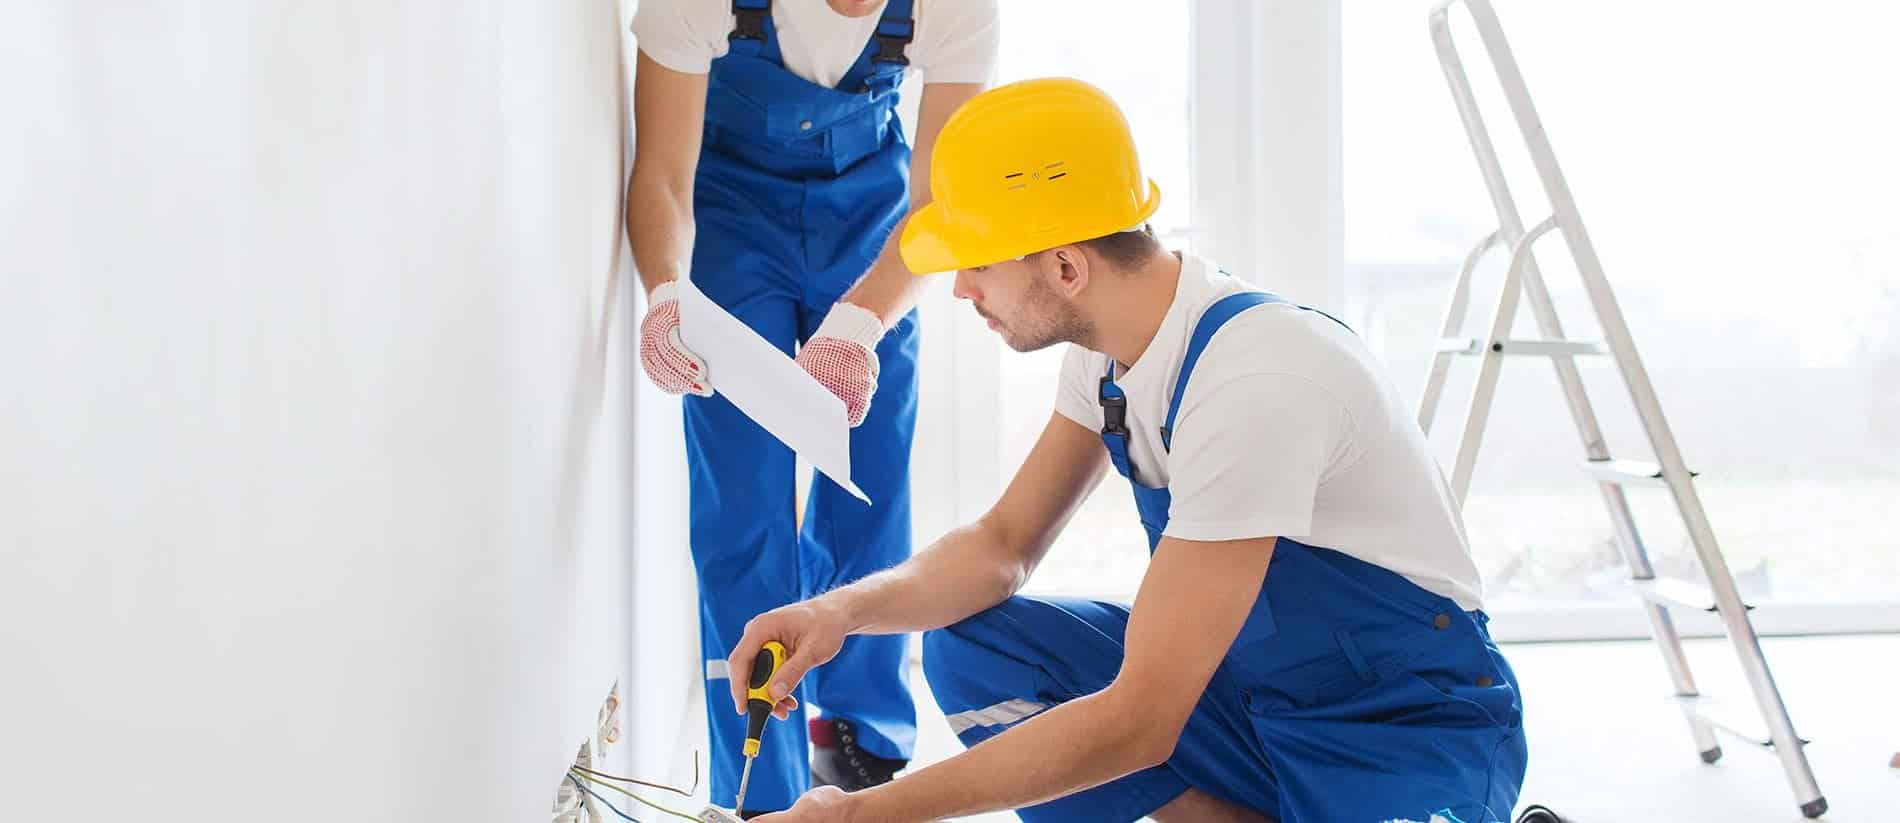 builders with tablet pc and equipment indoors